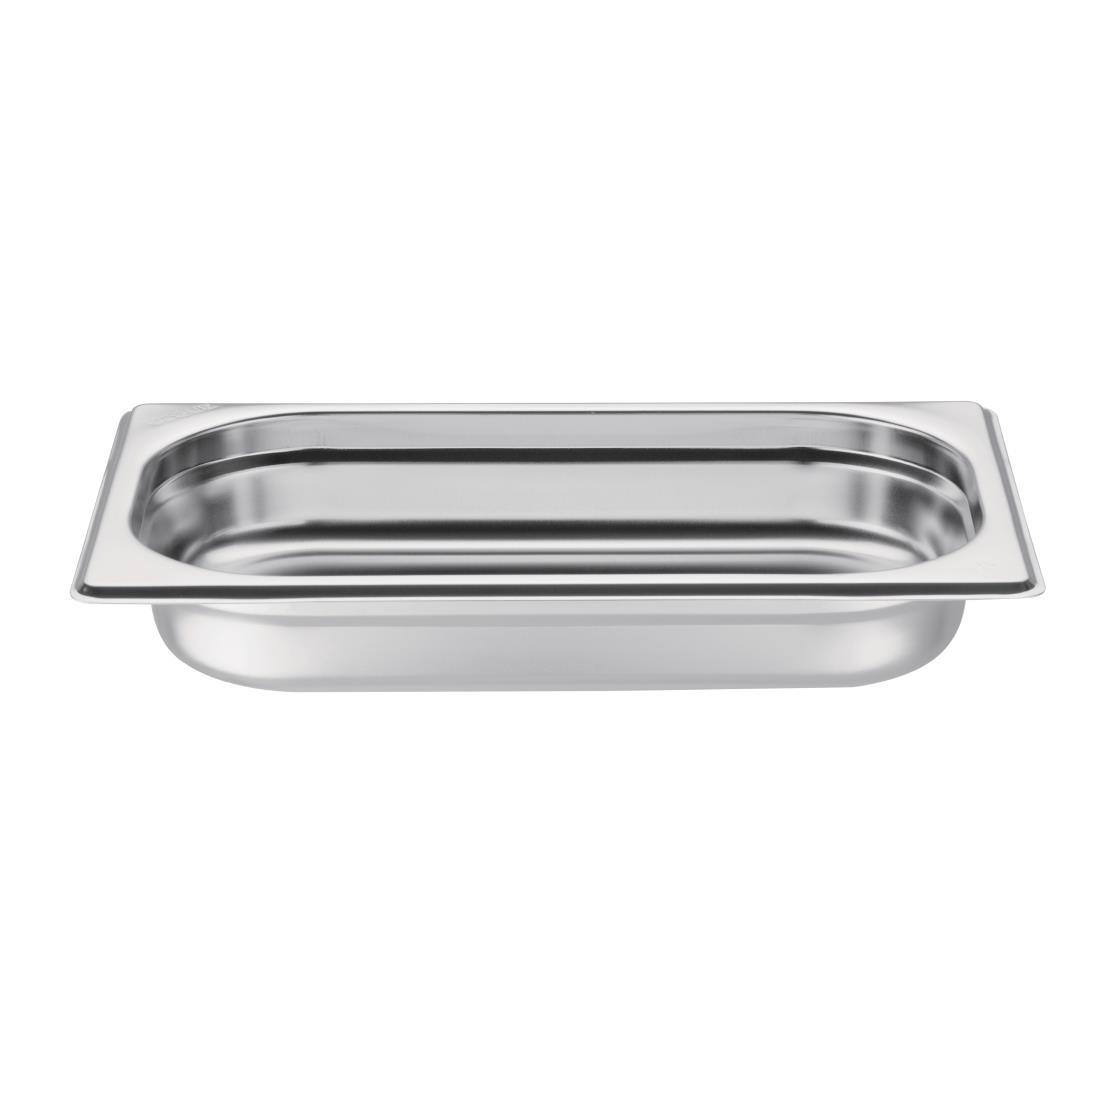 Vogue Stainless Steel 1/4 Gastronorm Pan 40mm - GM313  - 2